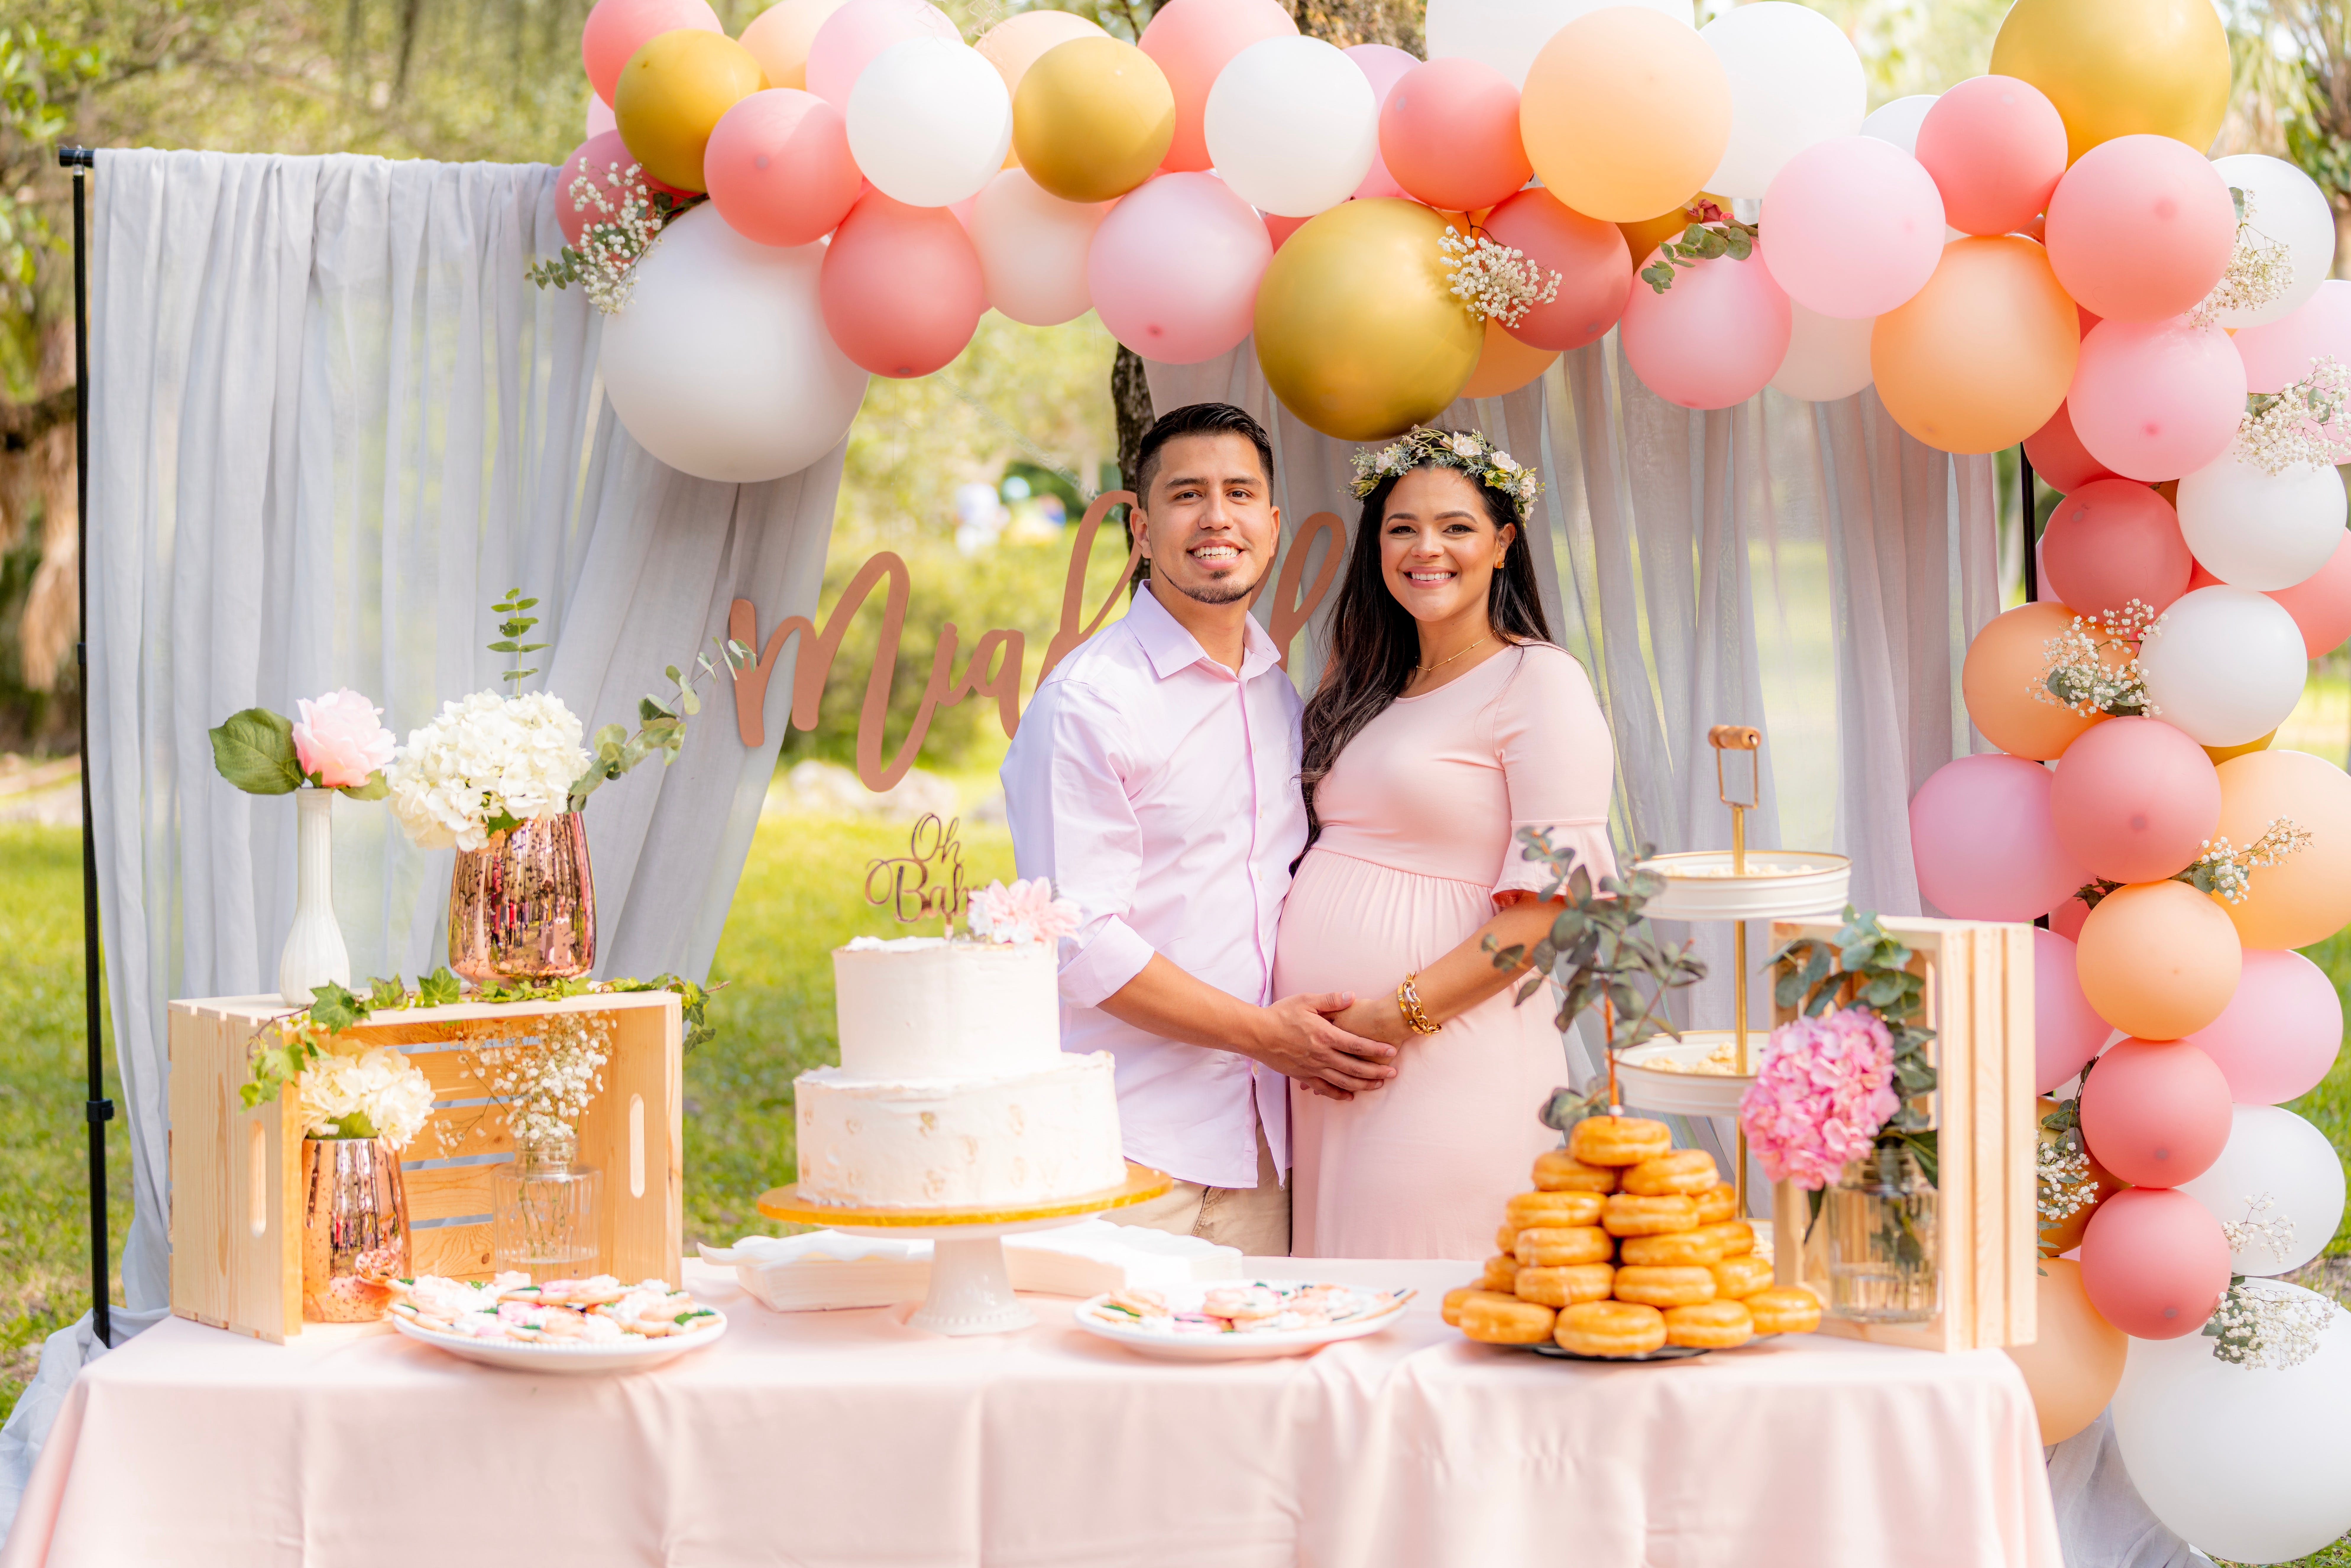 An expectant mother and father at a baby shower for their child | Source: Pexels